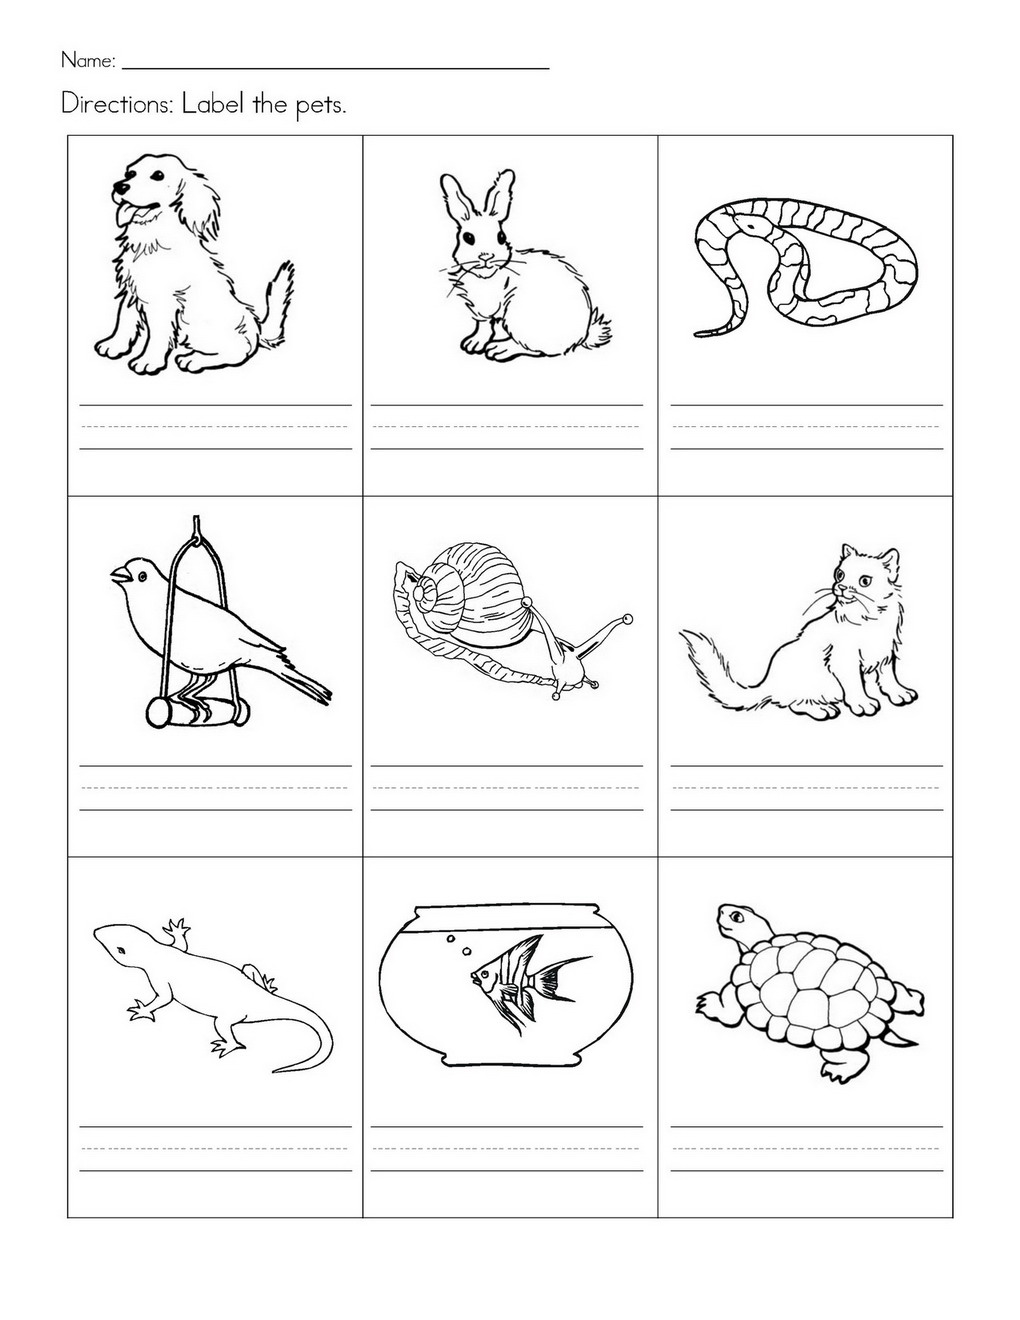 zoo-activities-for-preschoolers-zoo-coloring-pages-zoo-activity-pack-via-funwithmama-zoo